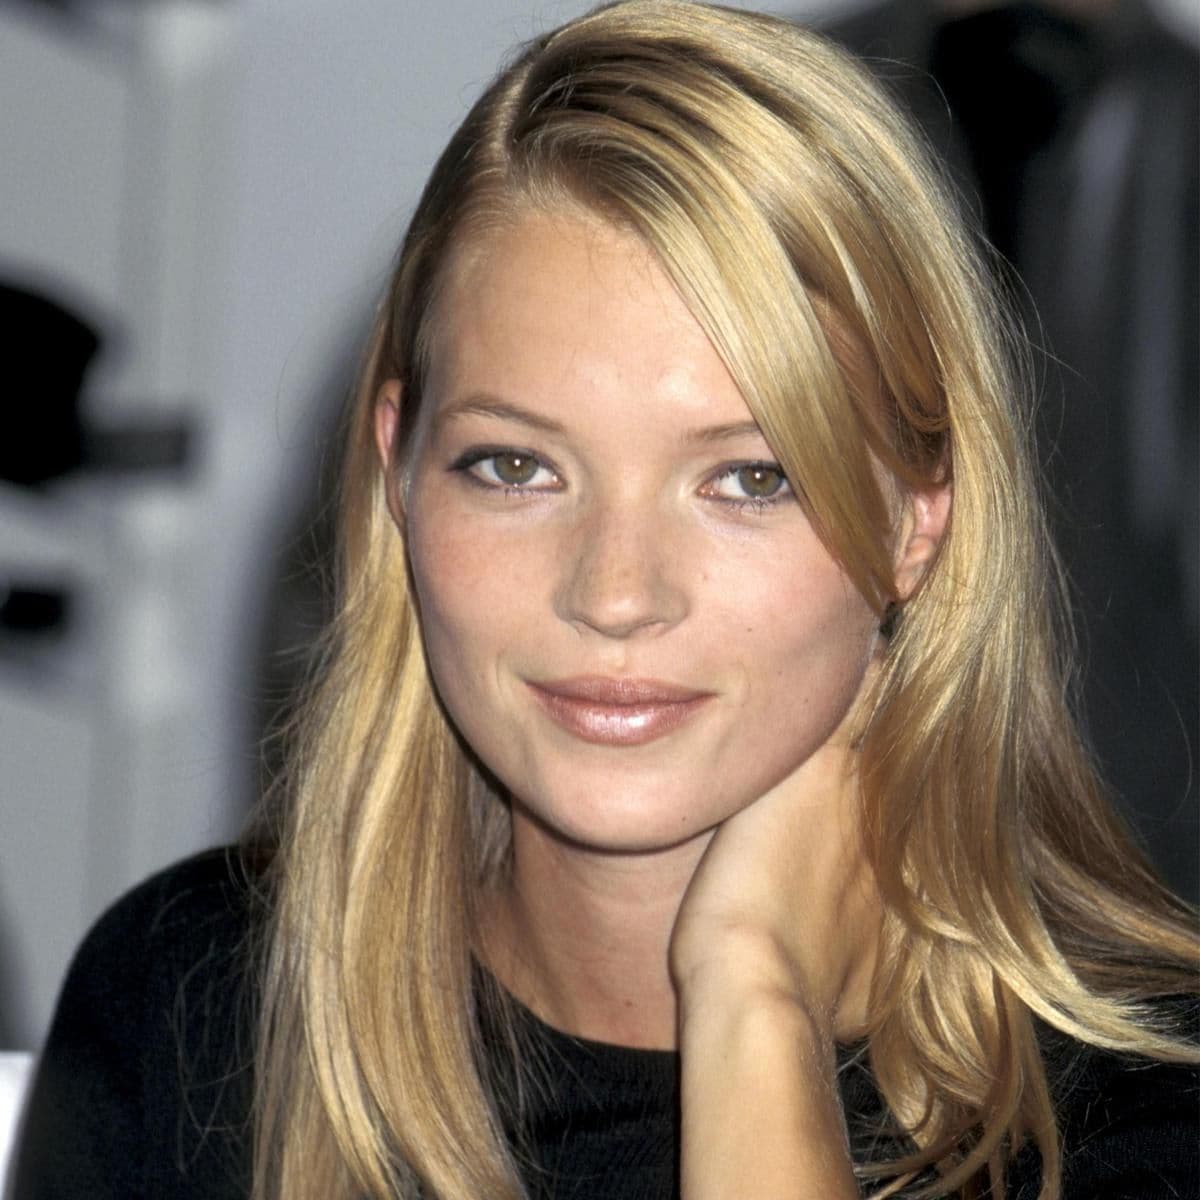 Kate Moss Calvin Klein Boutique Personal Appearance